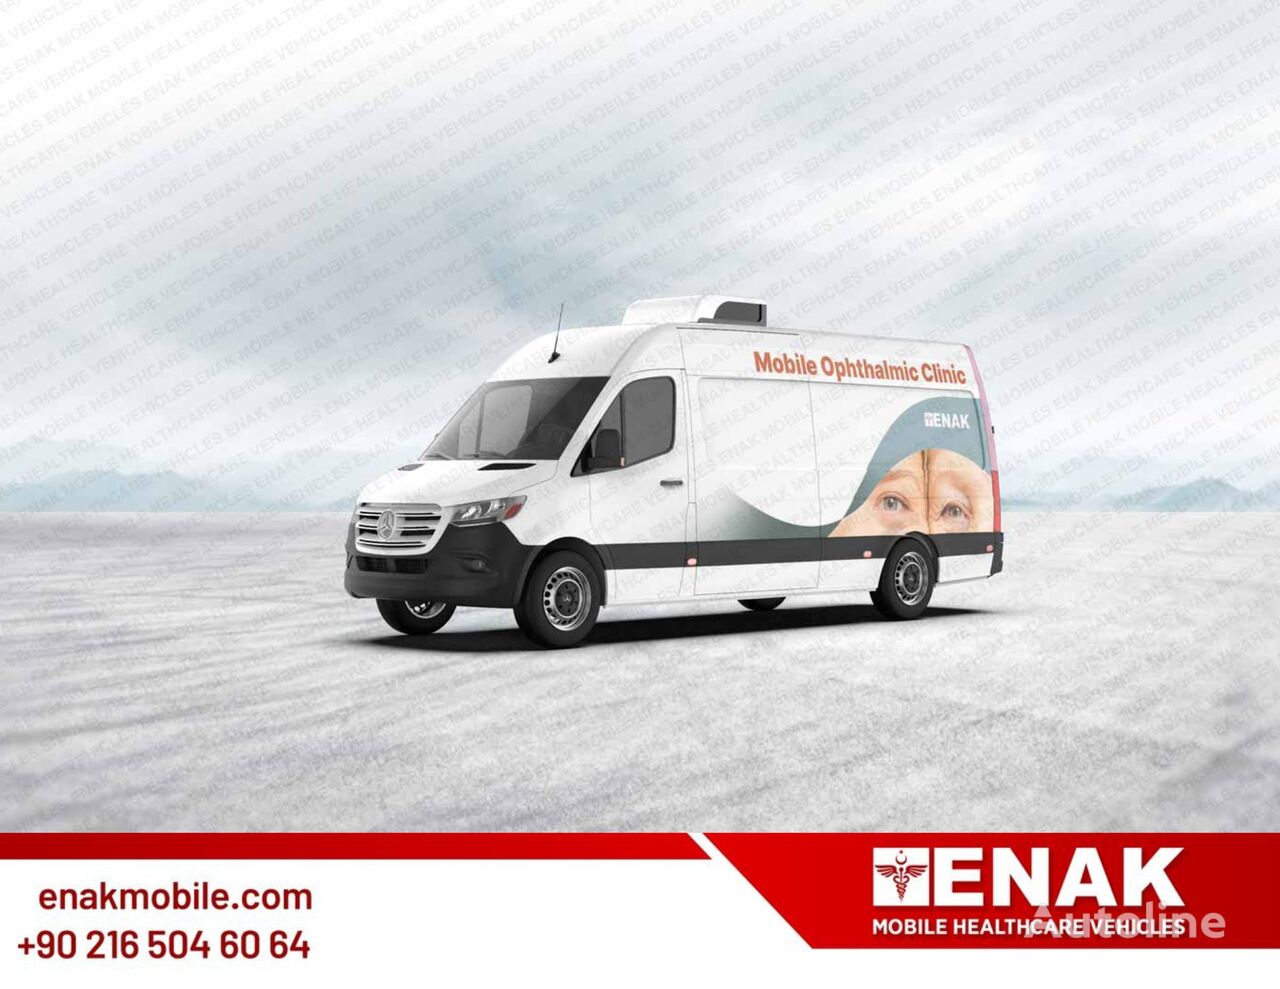 new Mercedes-Benz Mobile Clinic Ophthalmic Vehicle ambulance